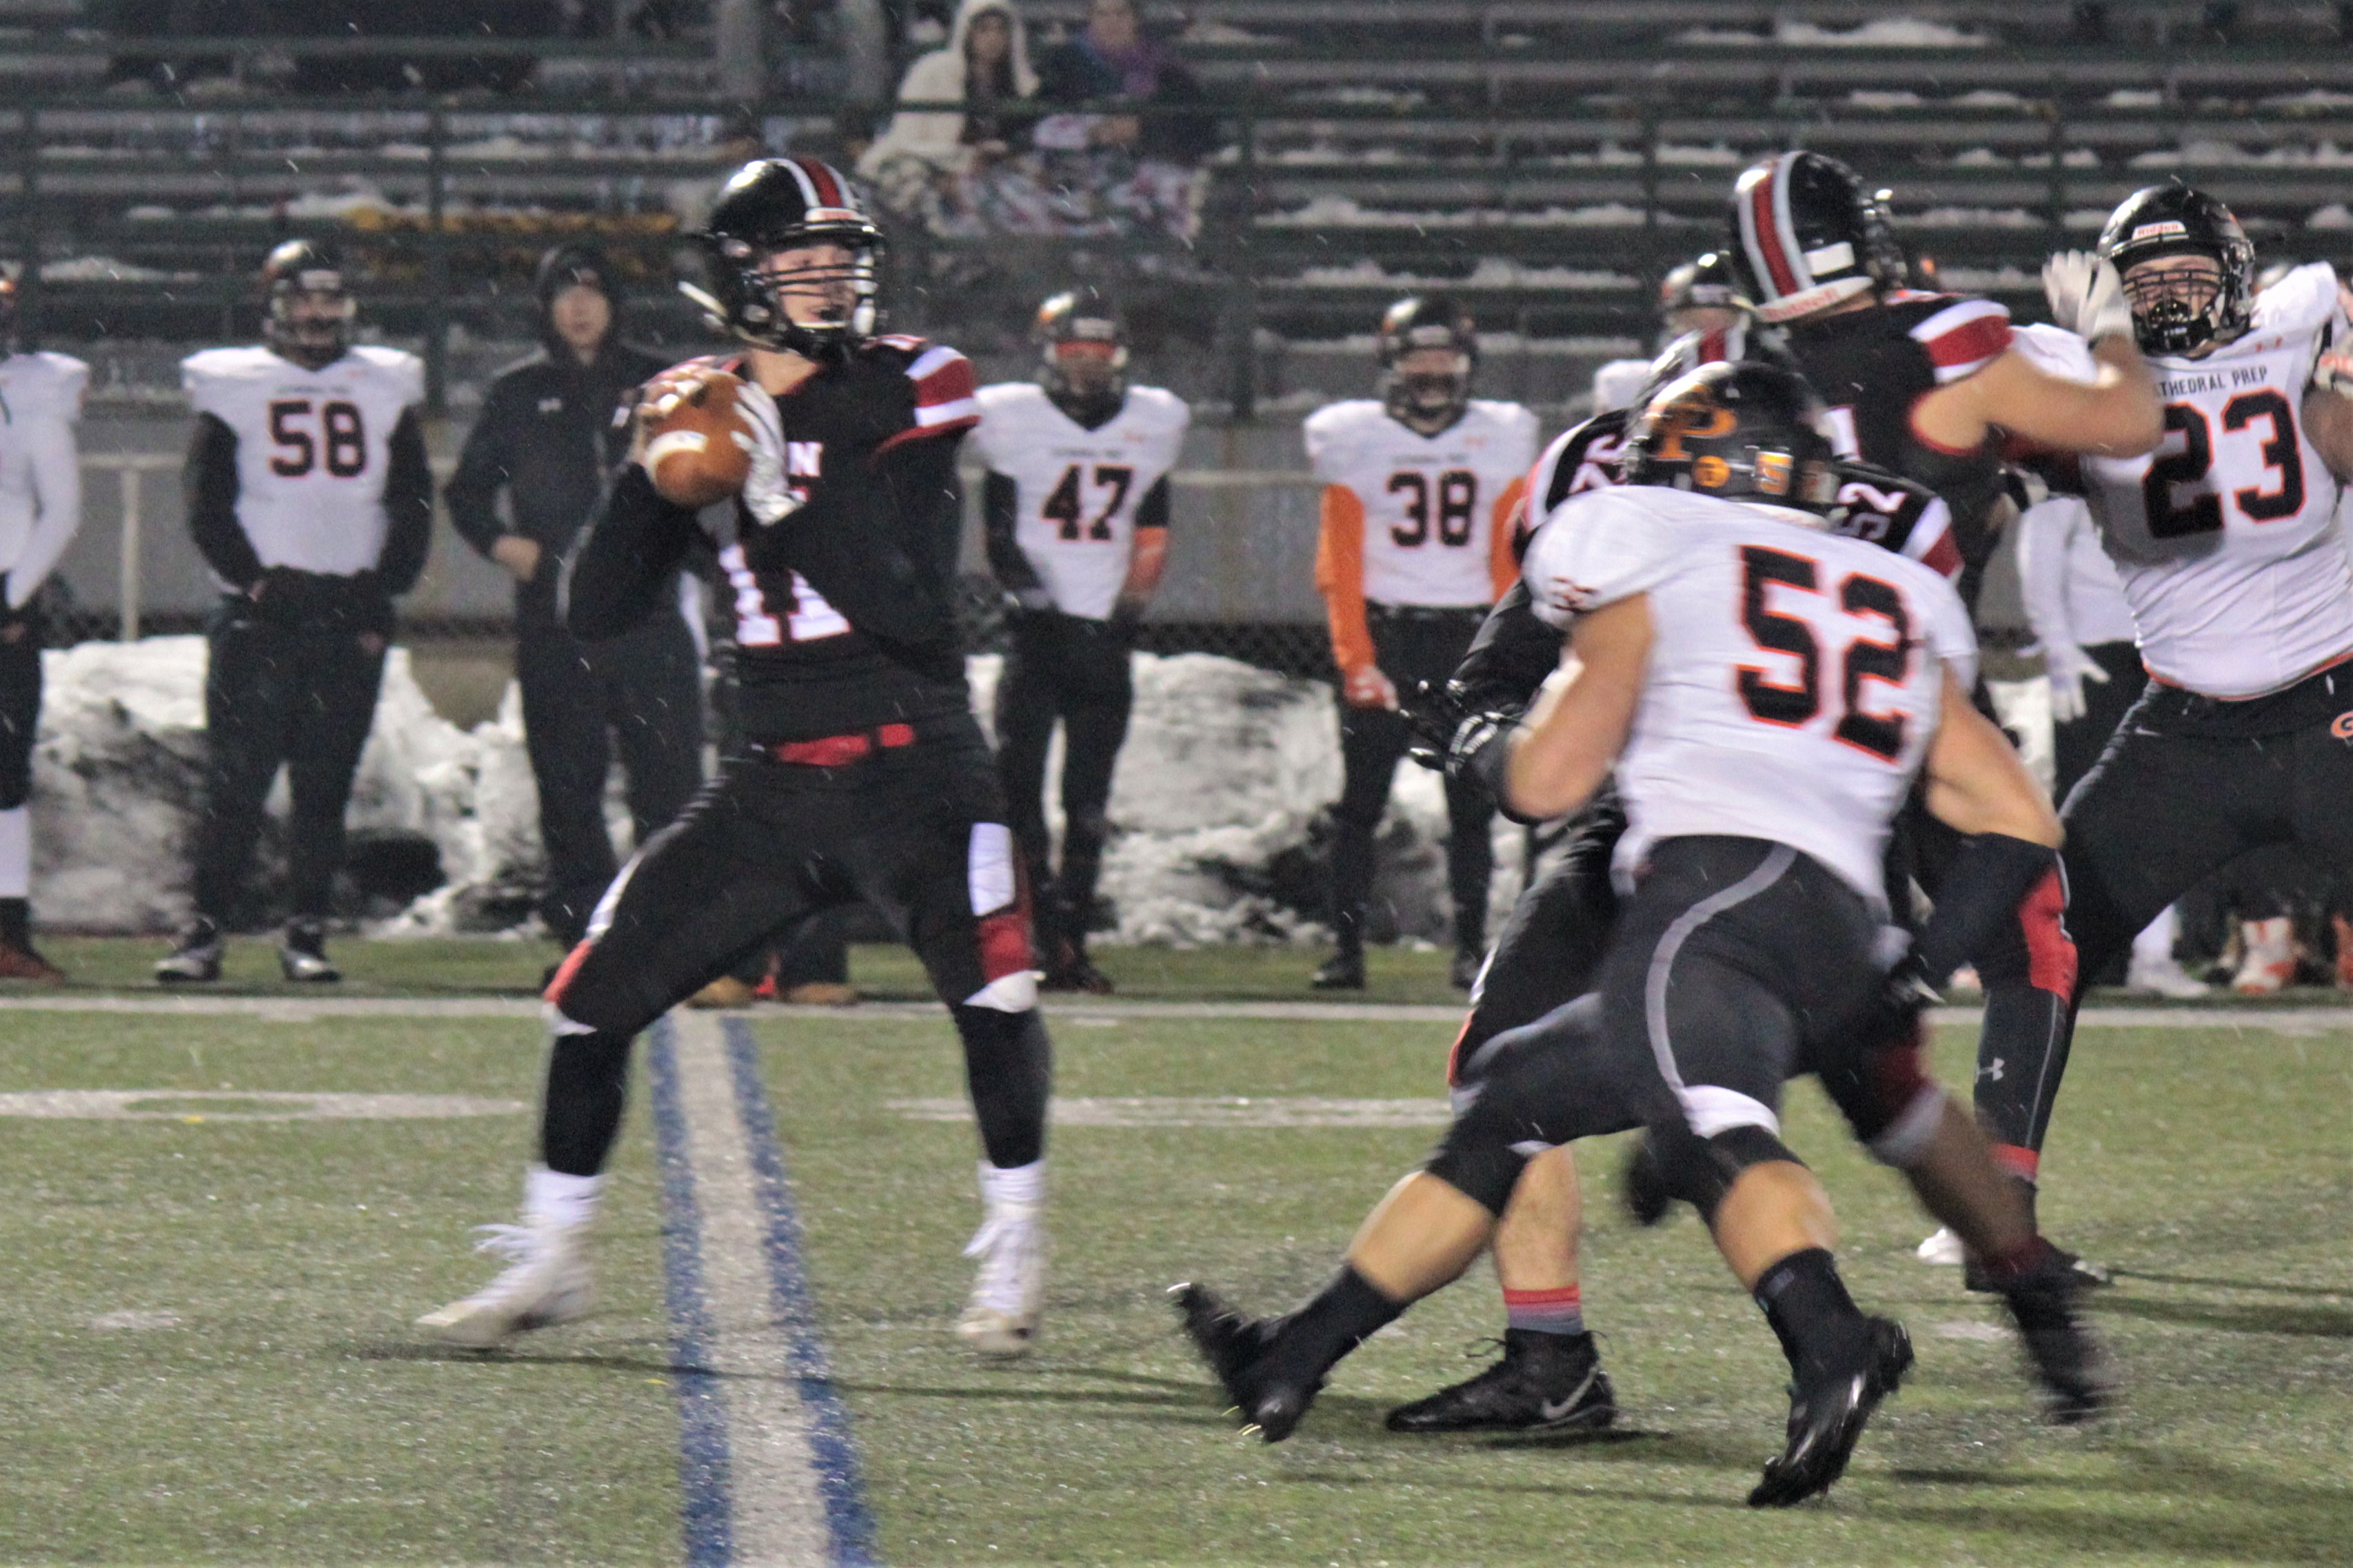 Isaac Rumery looks to his right for a receiver early against Cathedral Prep.  He finished with 122 yards passing, but did not finish the game.